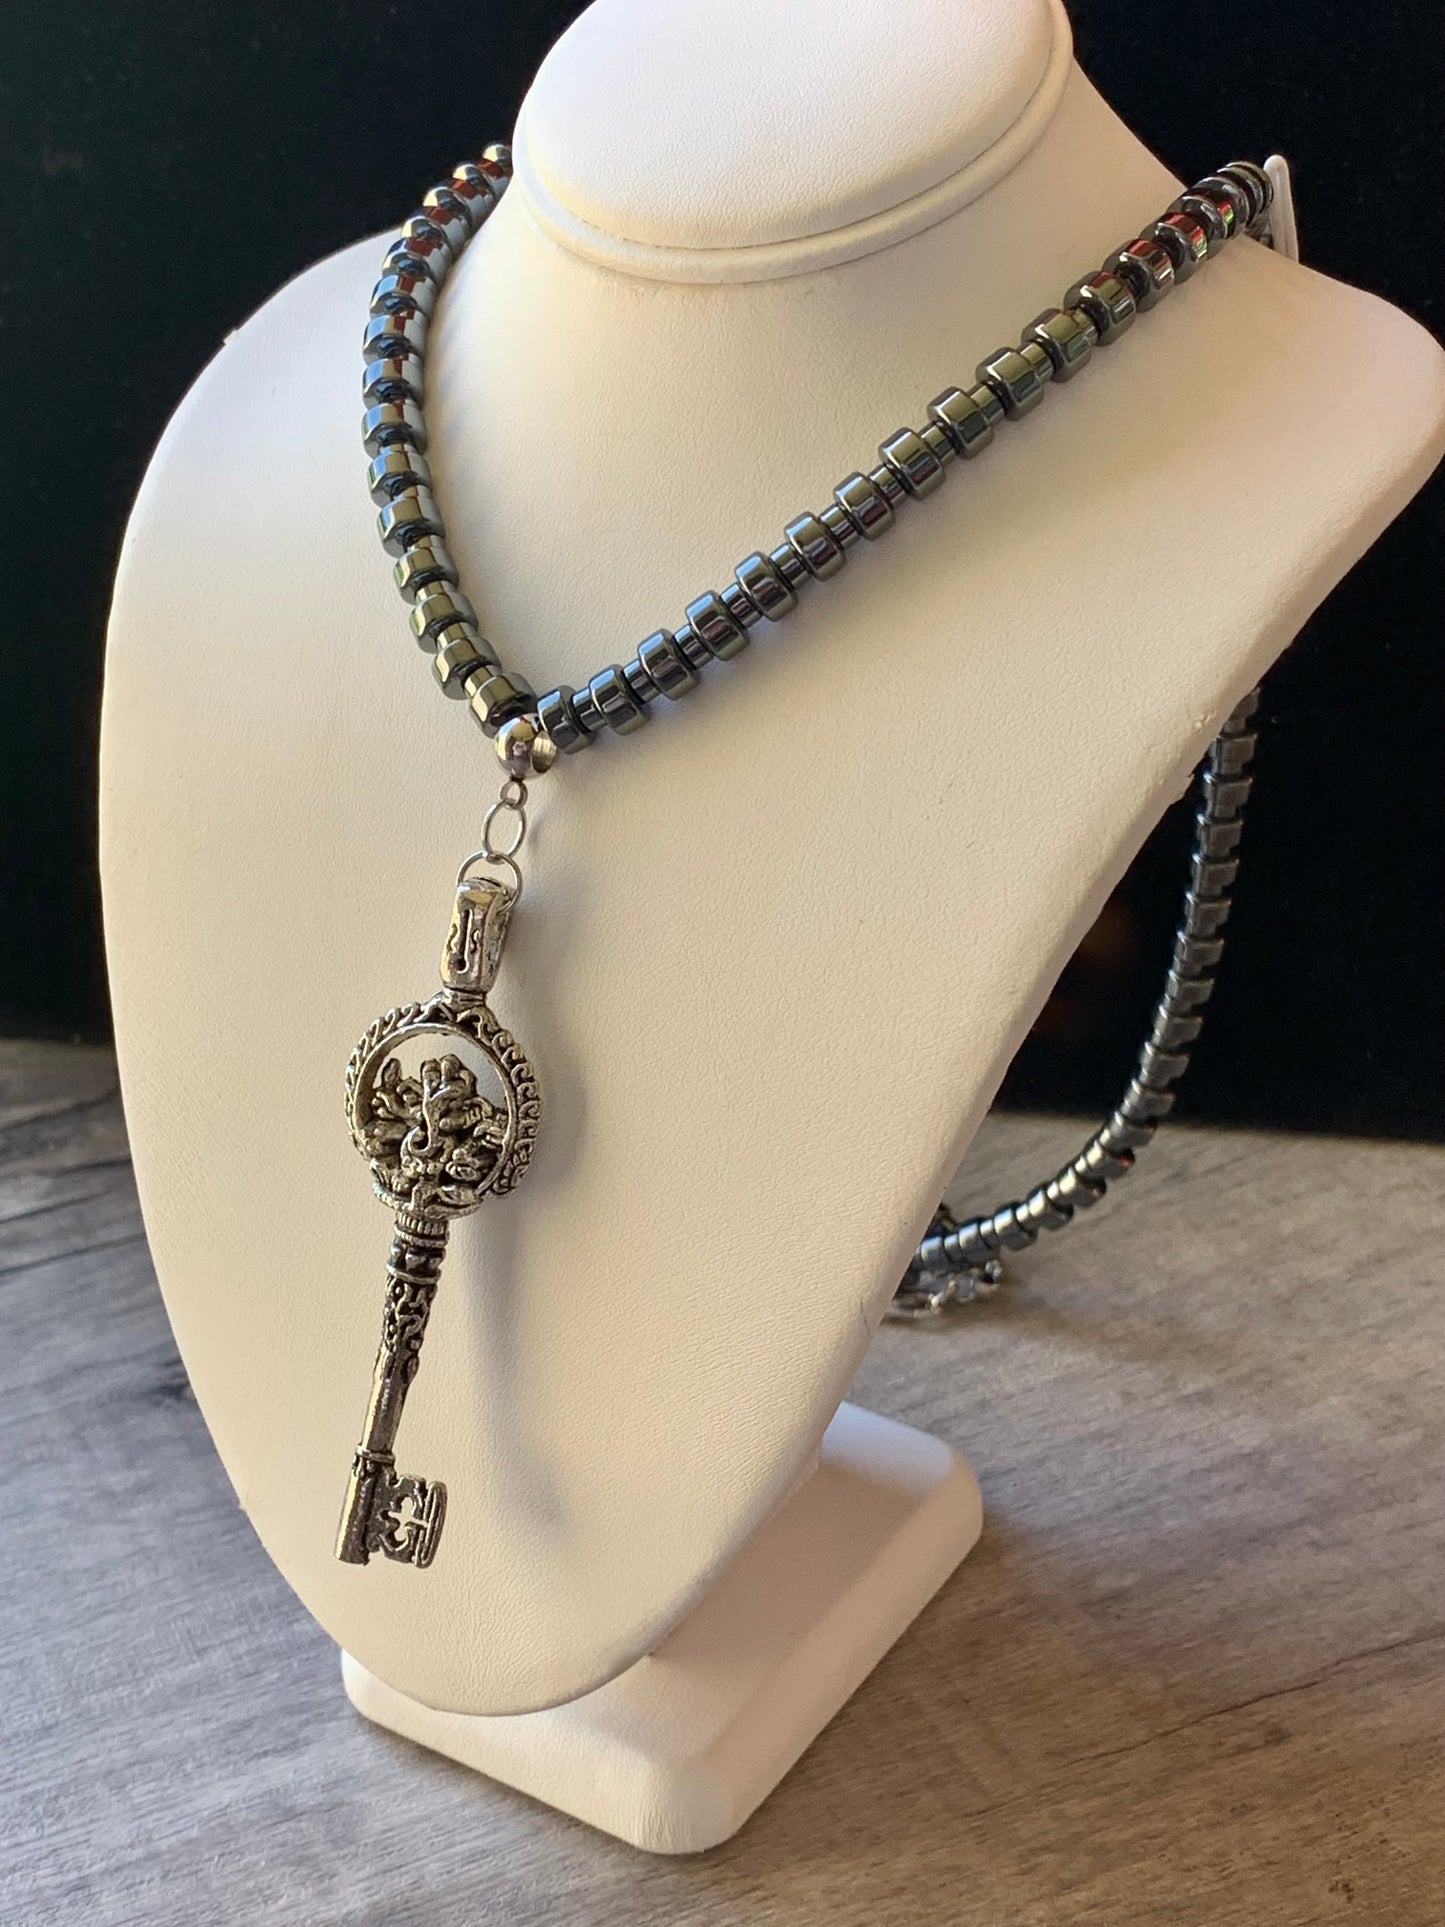 Handmade Hematite Necklace with Ganesh Key Unisex One of a Kind